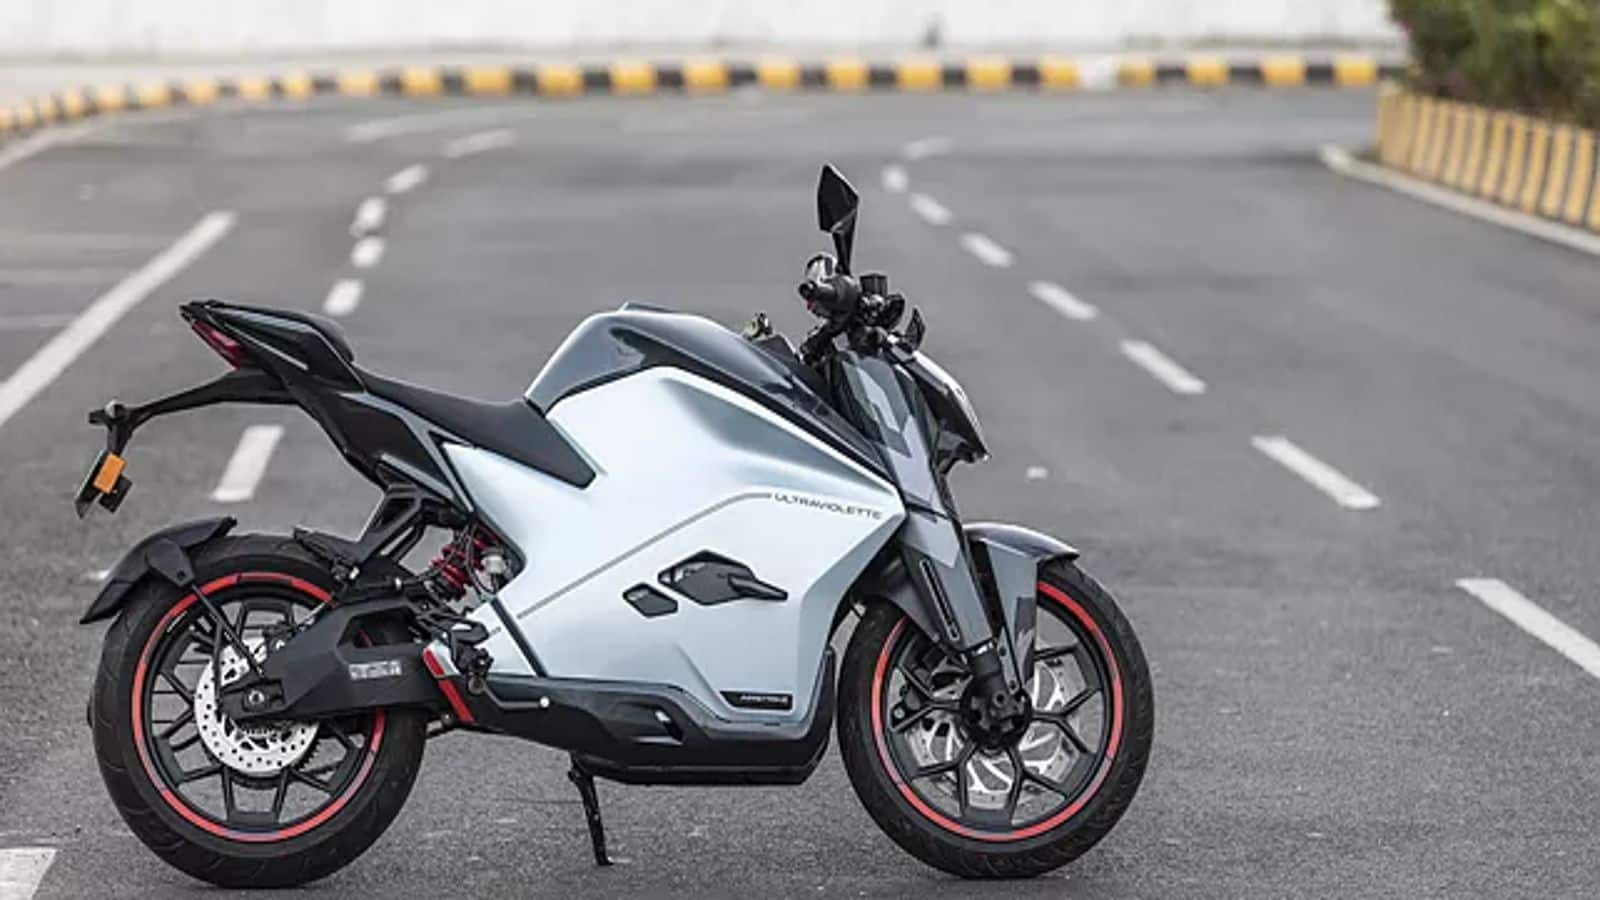 Ultraviolette Automotive's new electric motorcycle to debut on April 24